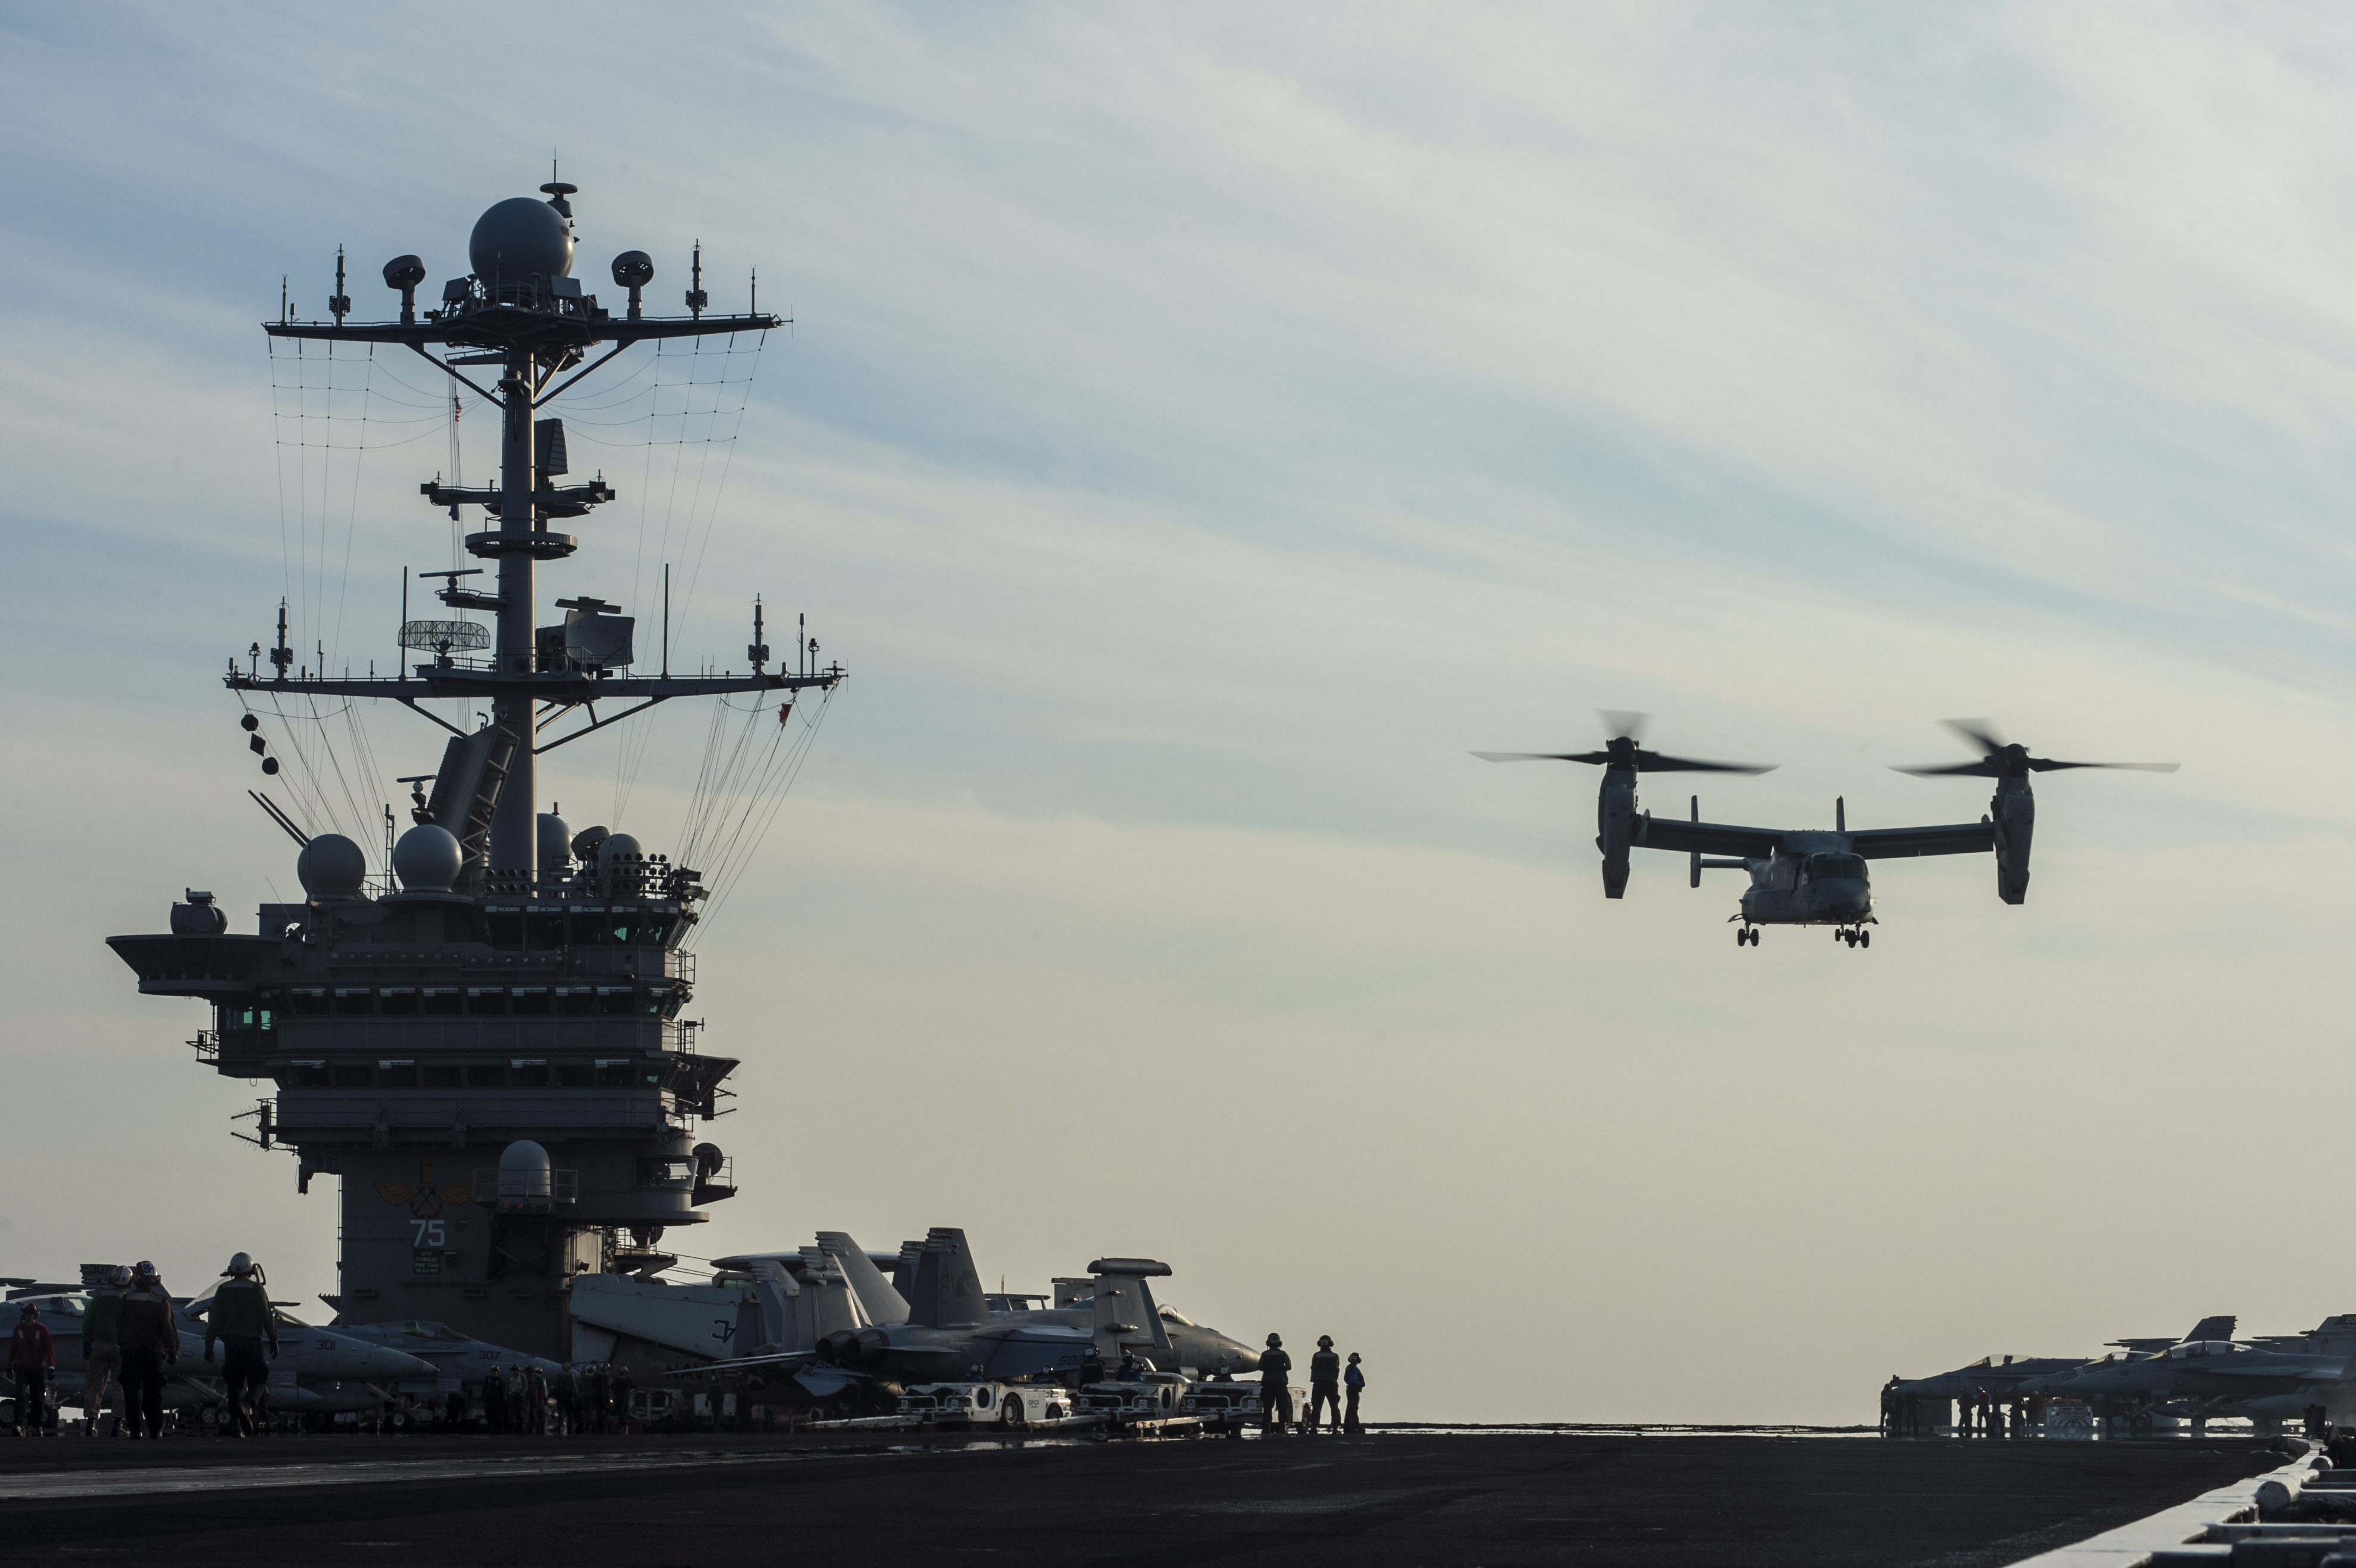 An MV-22 Osprey, assigned to Marine Medium Tiltrotor Squadron 166, launches from the flight deck of the aircraft carrier USS Harry S. Truman (CVN-75). US Navy Photo